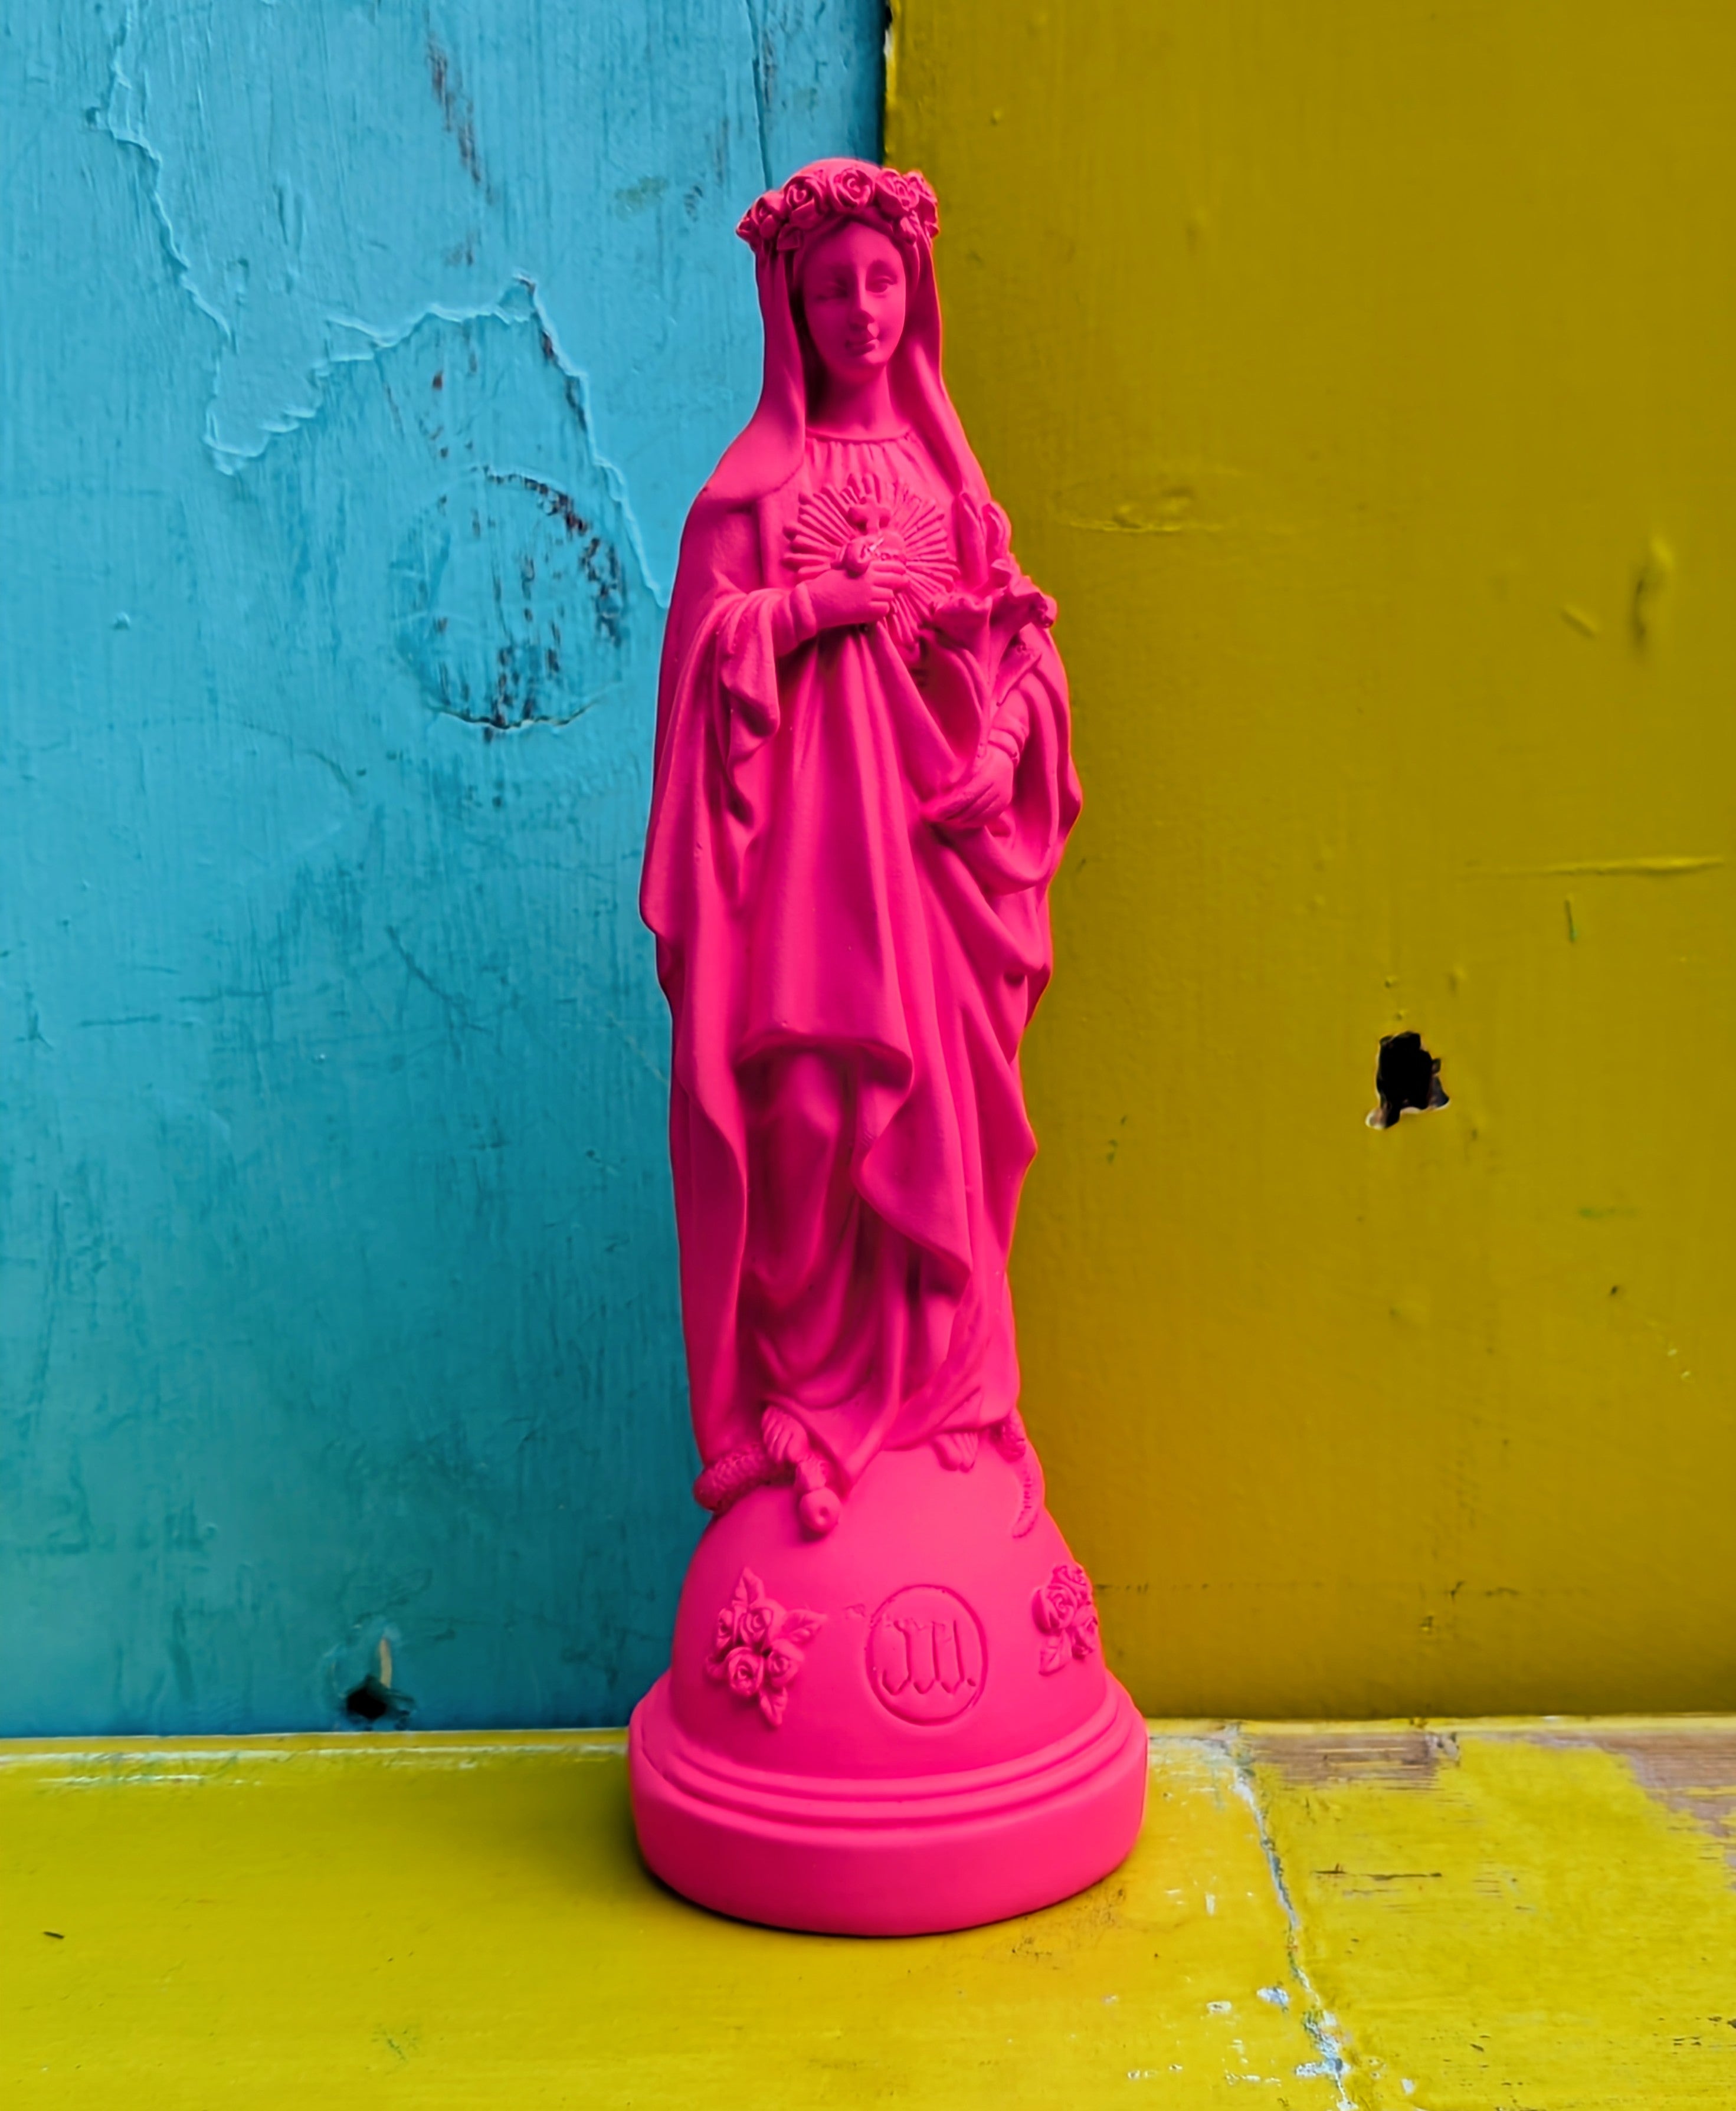 Divine kitsch statues - Virgin with flowers